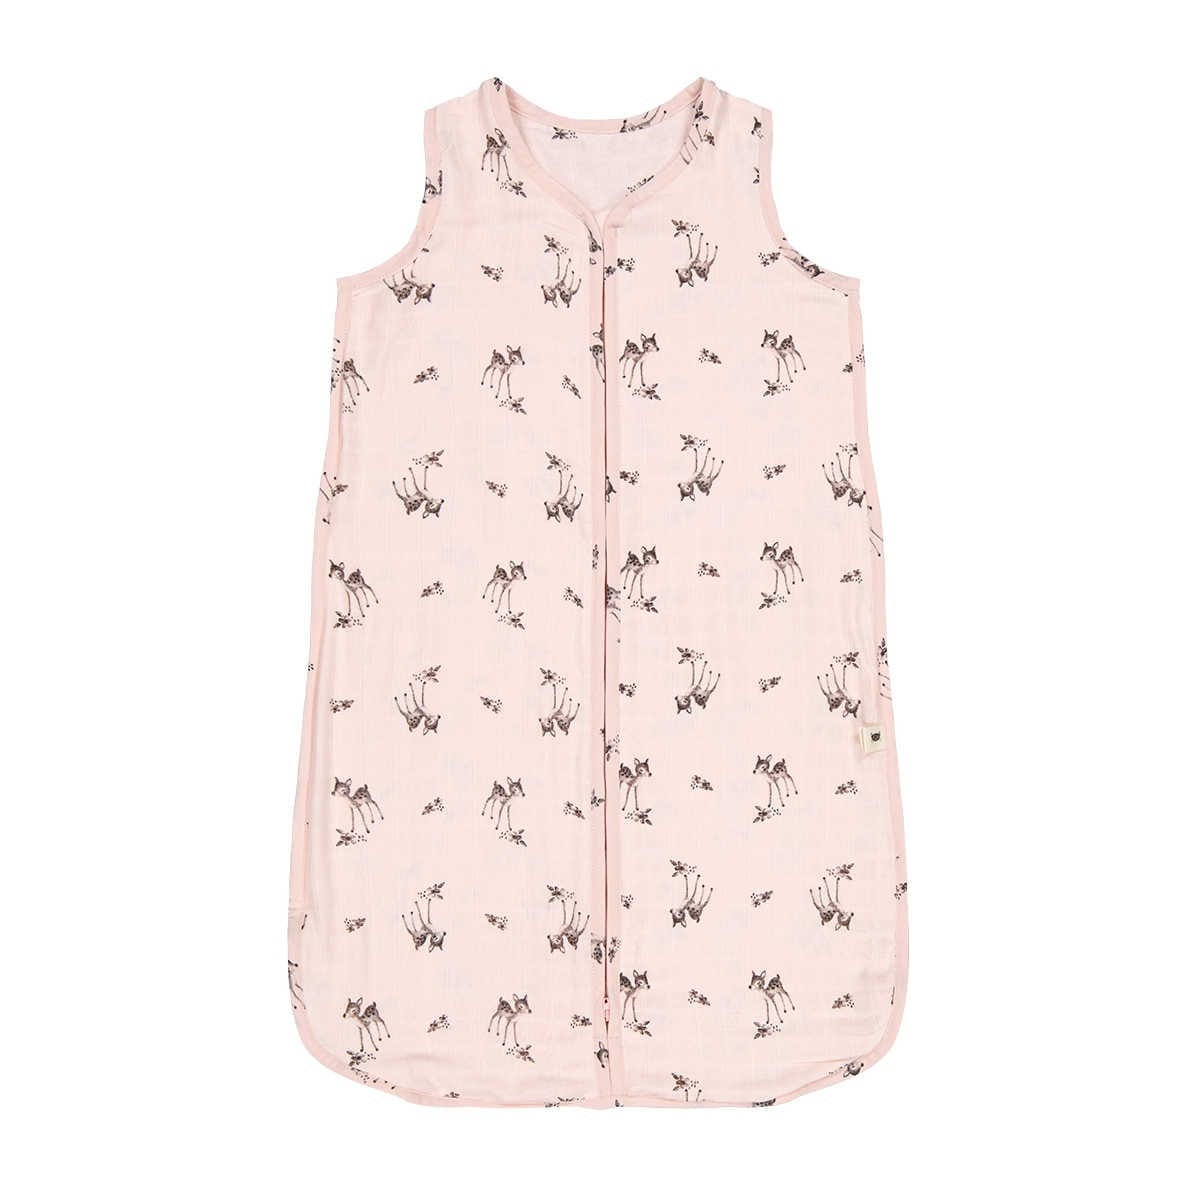 Summer sleeping bag in pink with printed fawns